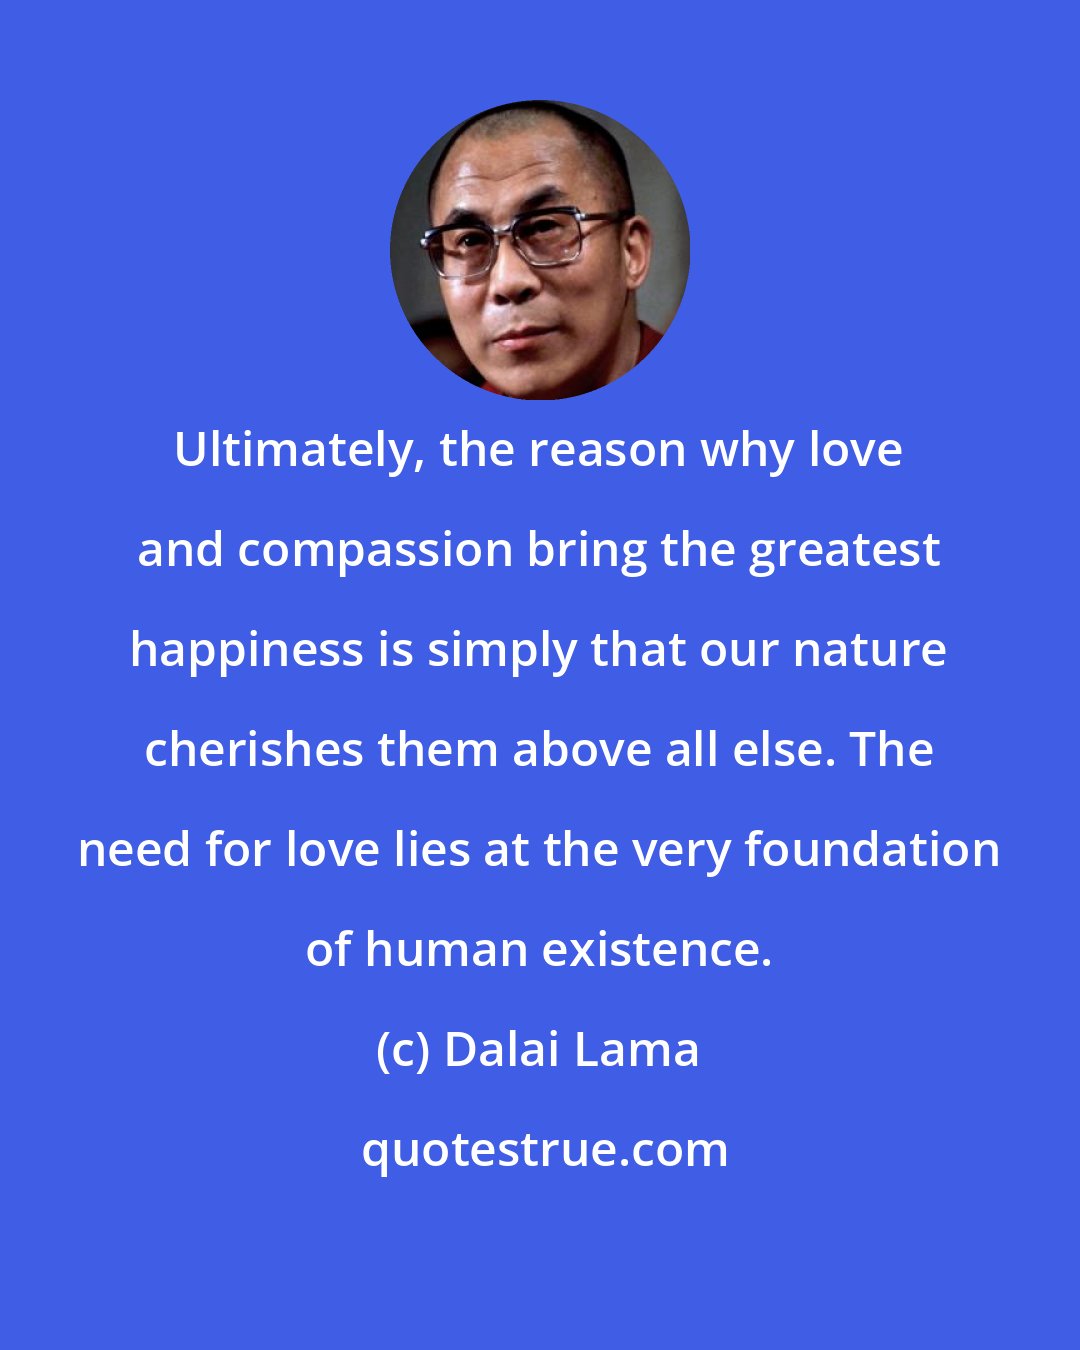 Dalai Lama: Ultimately, the reason why love and compassion bring the greatest happiness is simply that our nature cherishes them above all else. The need for love lies at the very foundation of human existence.